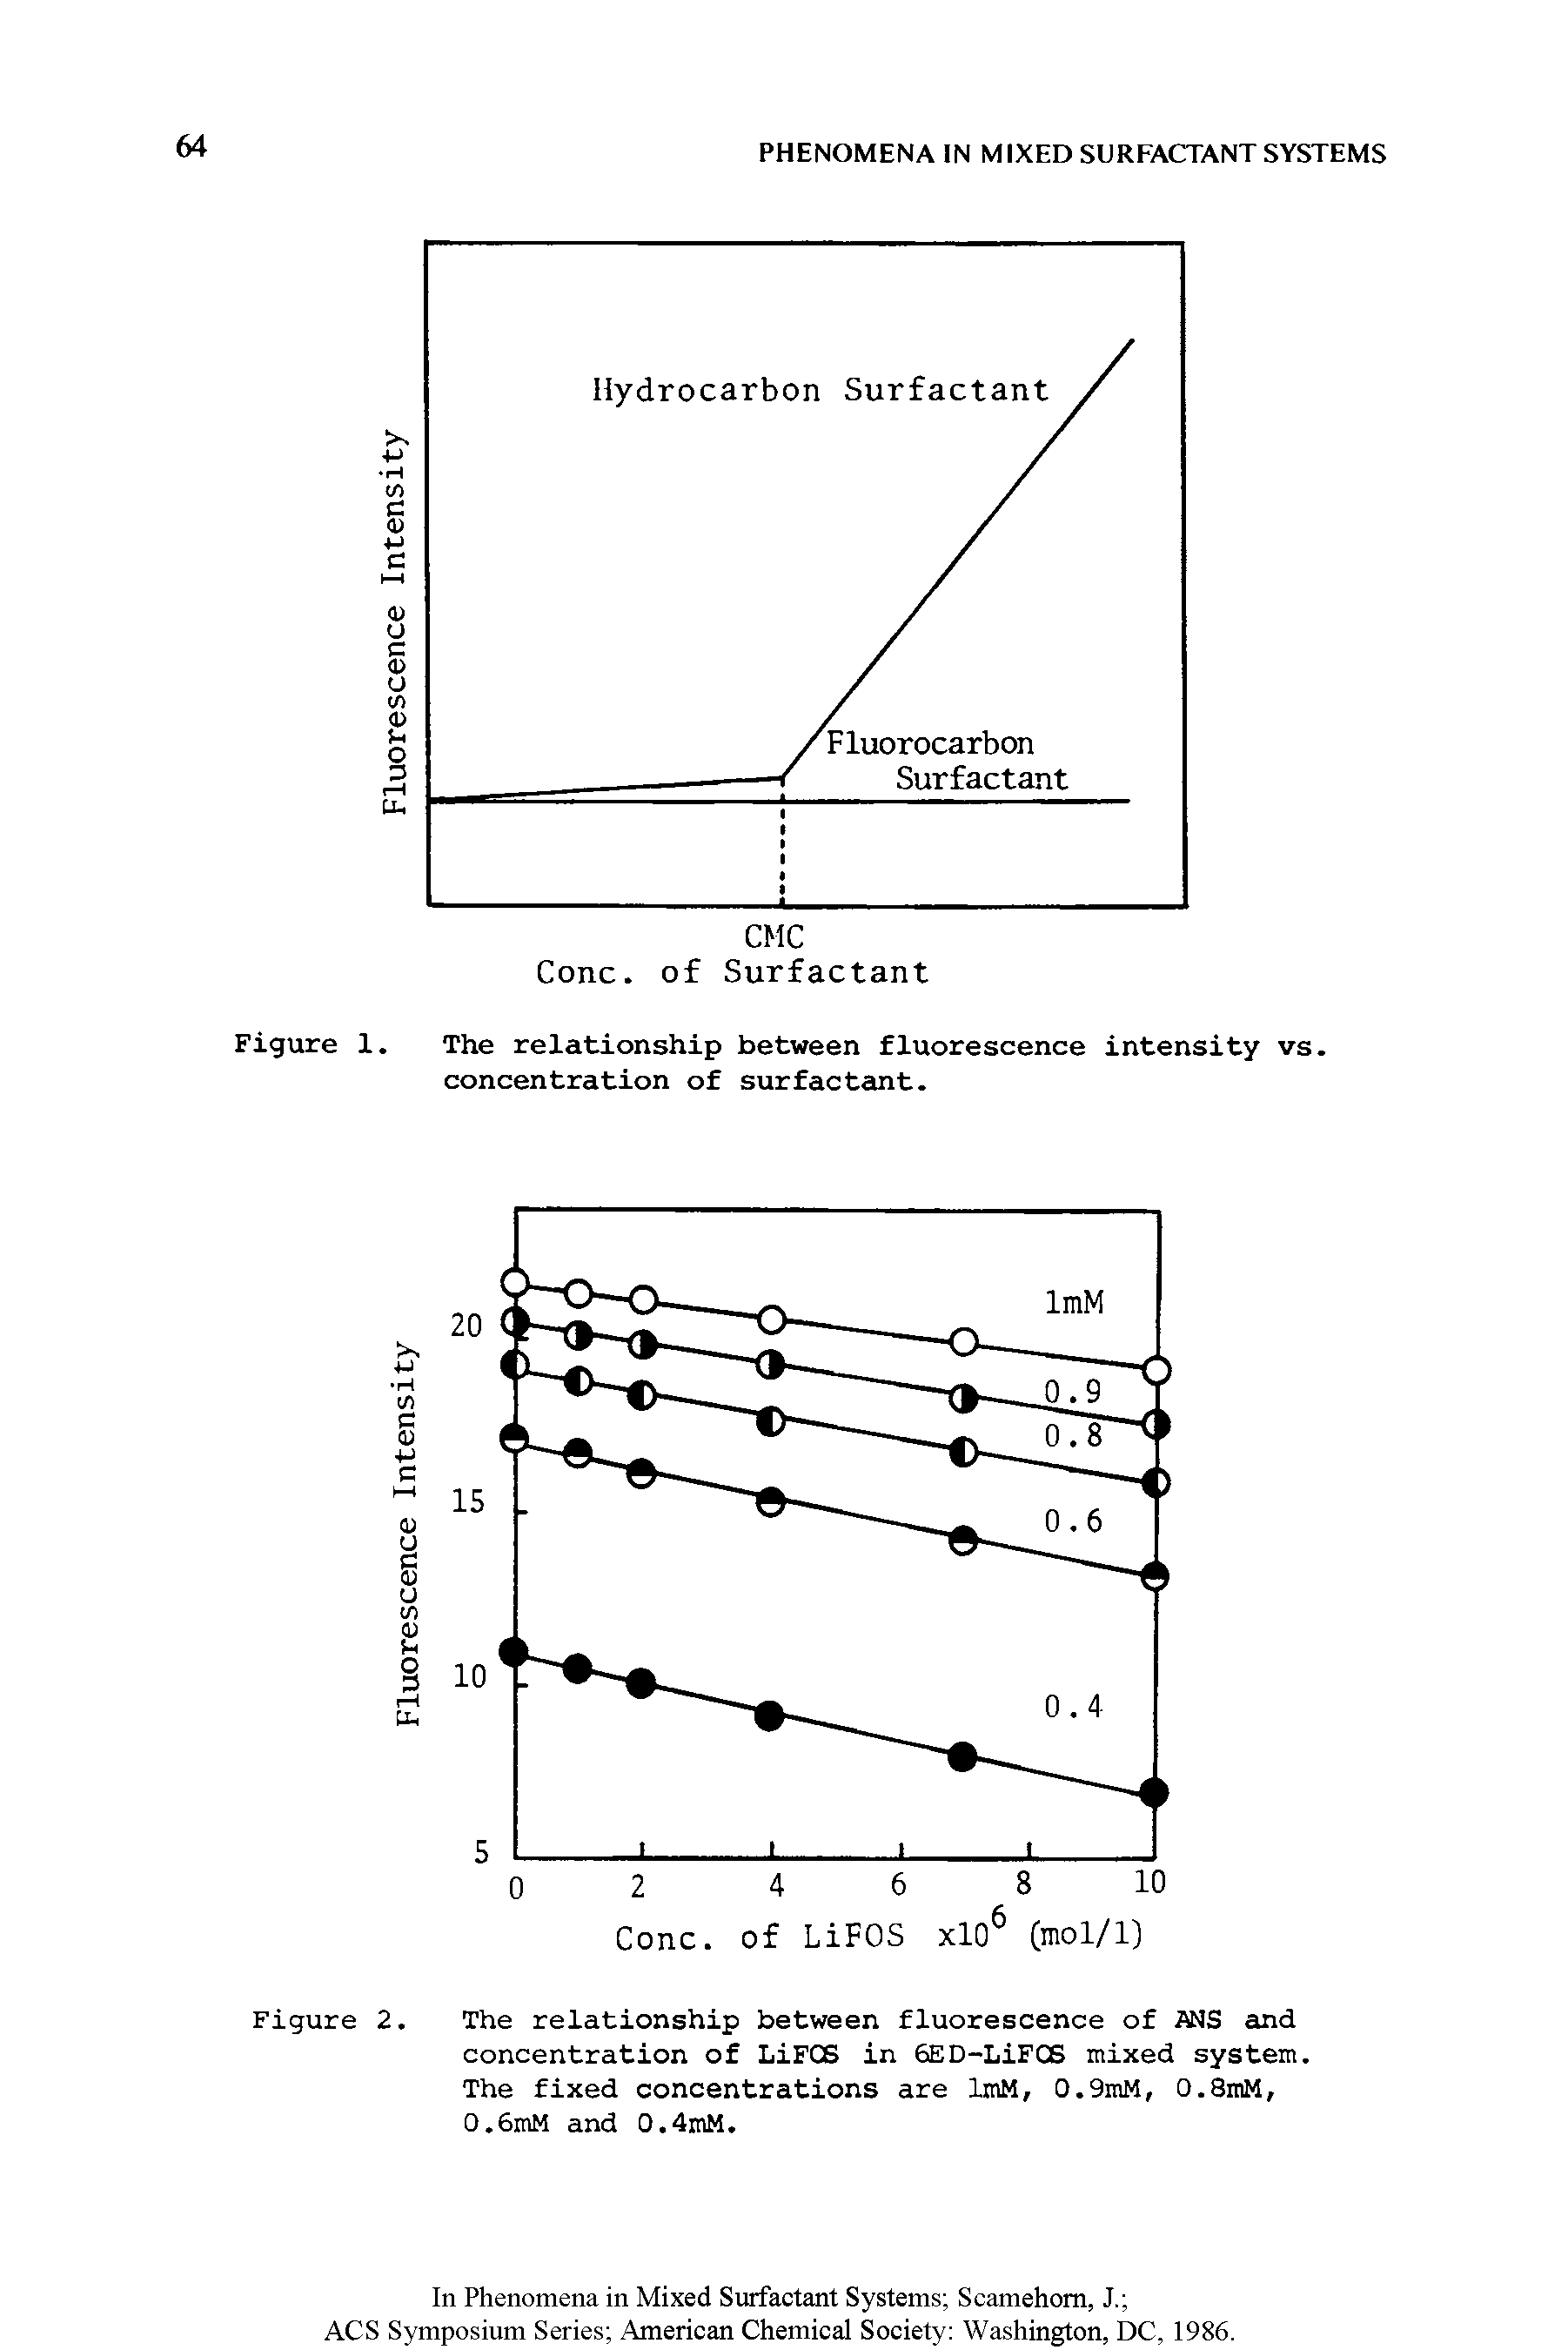 Figure 2. The relationship between fluorescence of ANS and concentration of LiFCB in 6ED-LiFCB mixed system. The fixed concentrations are ImM, 0.9mM, O.SmM, 0.6mM and 0.4mM.